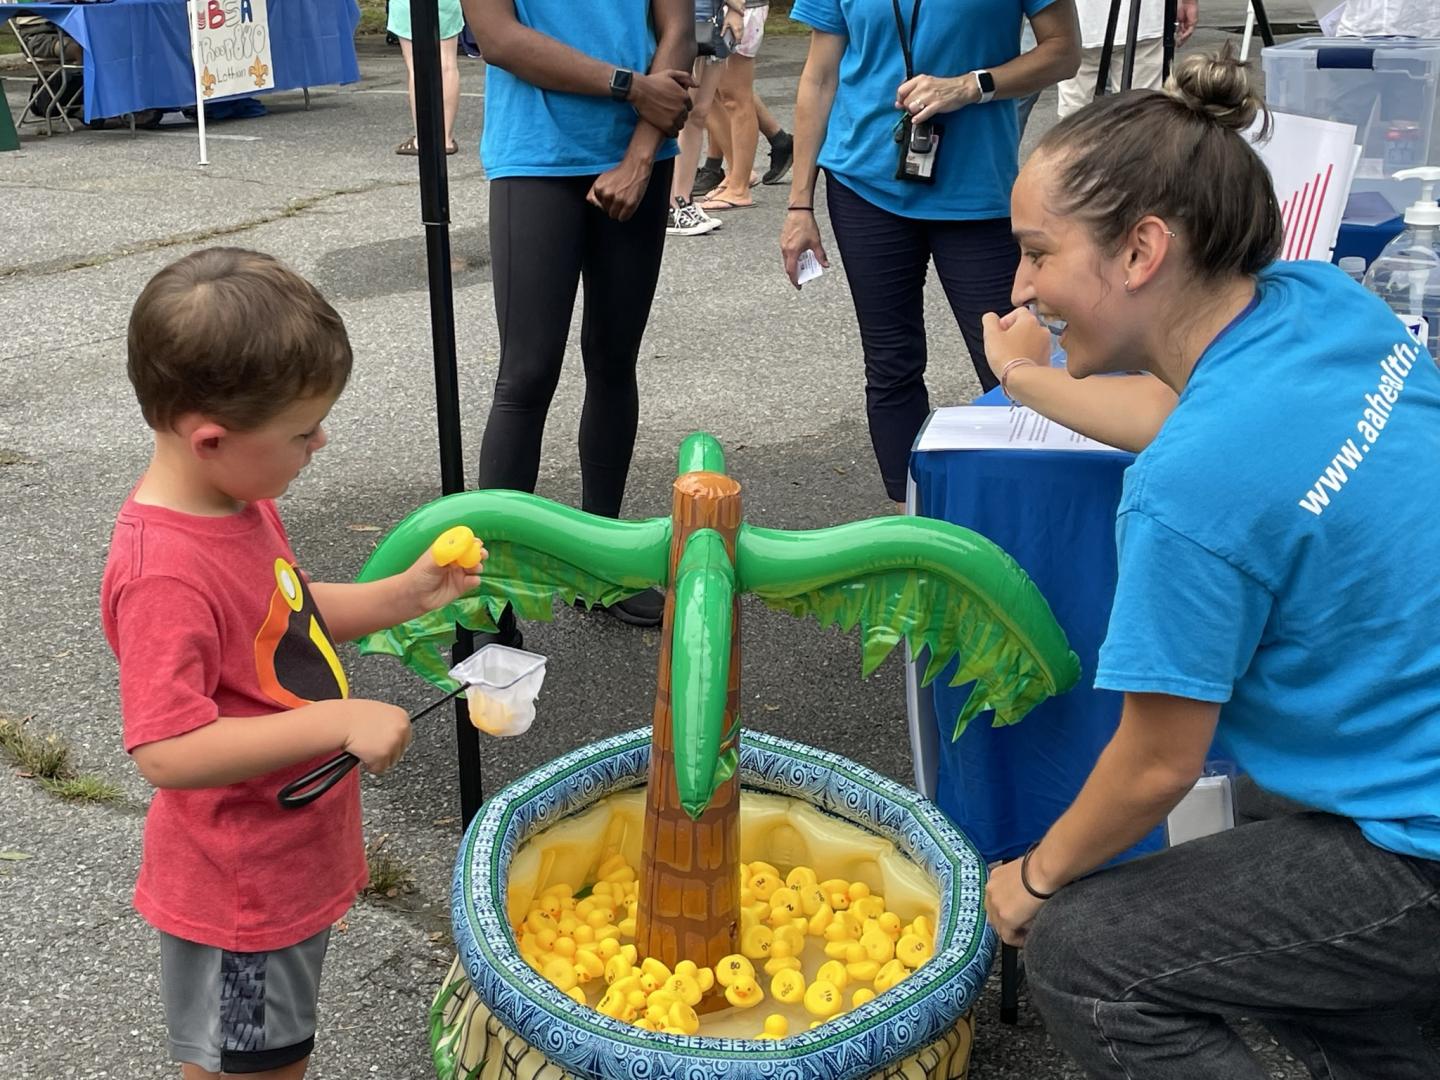 A child playing with rubber ducks at a Department of Health event booth